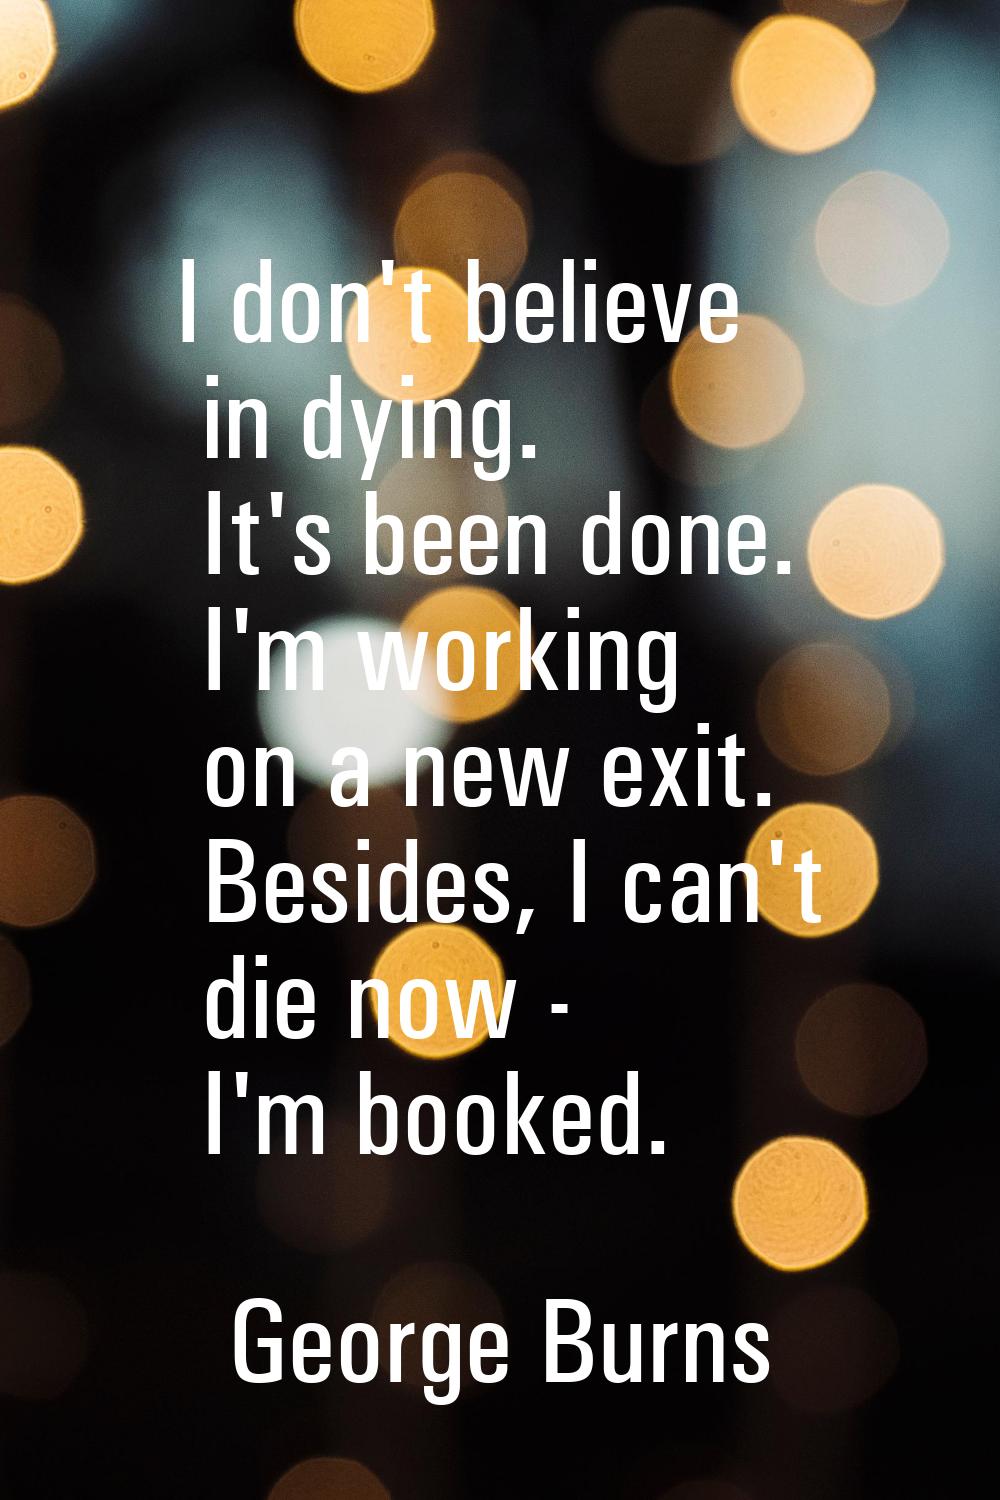 I don't believe in dying. It's been done. I'm working on a new exit. Besides, I can't die now - I'm